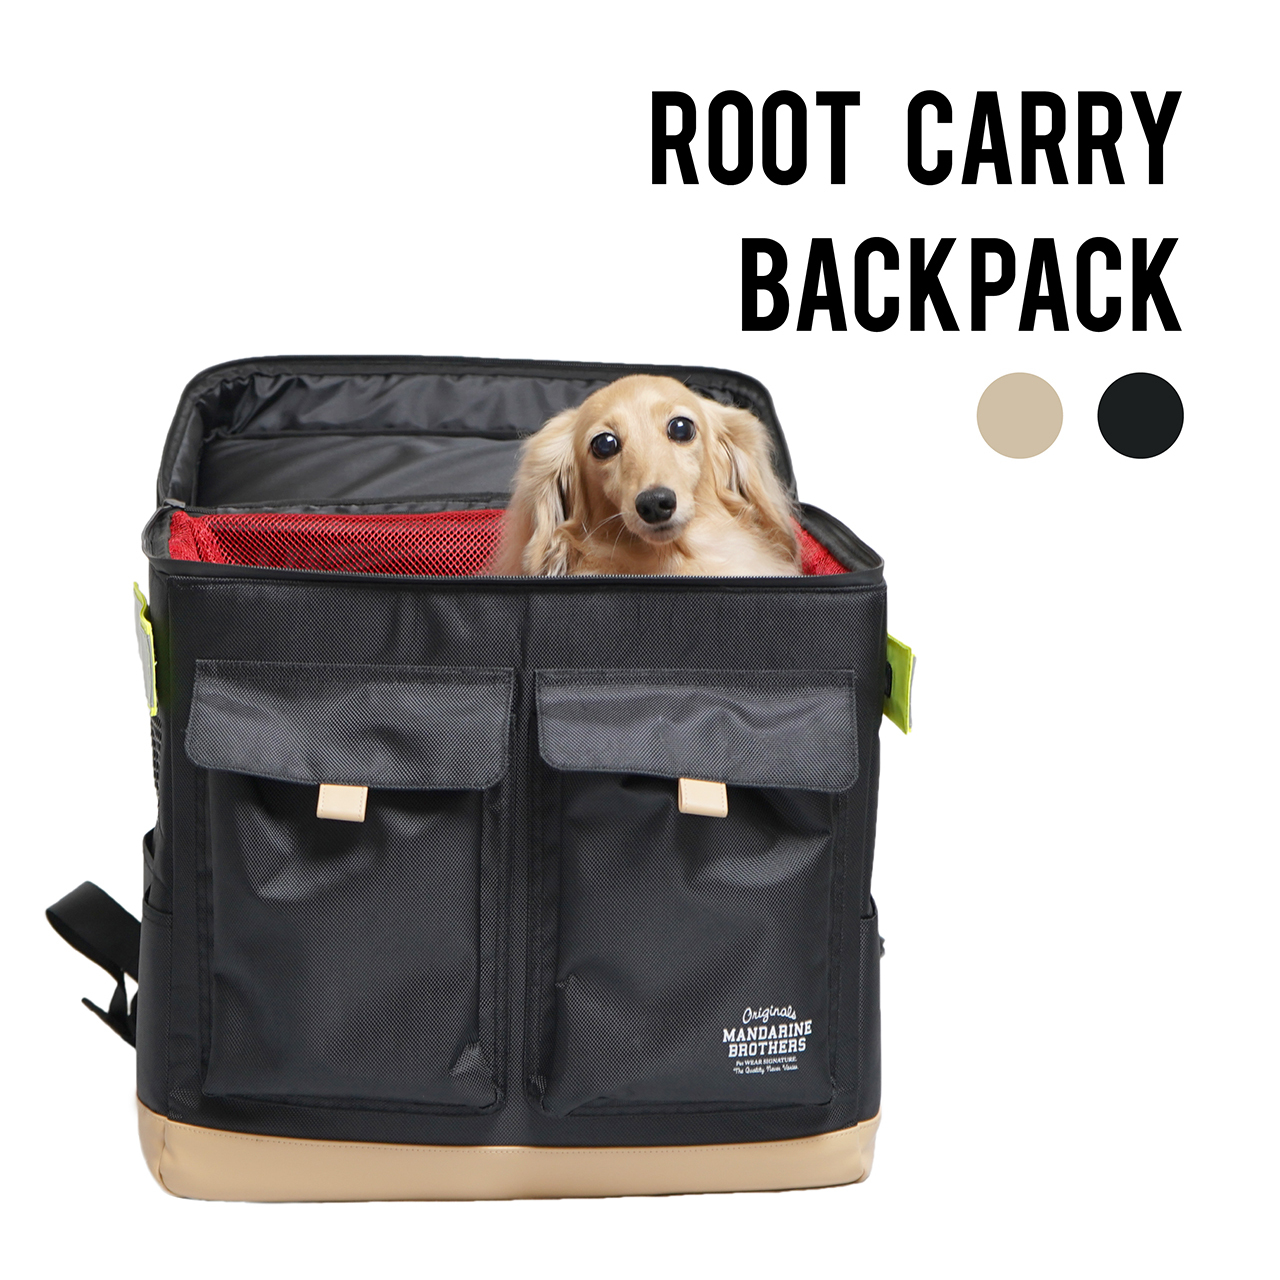 Root Carry Backpack ルートキャリーバックパック Mandarine Brothers